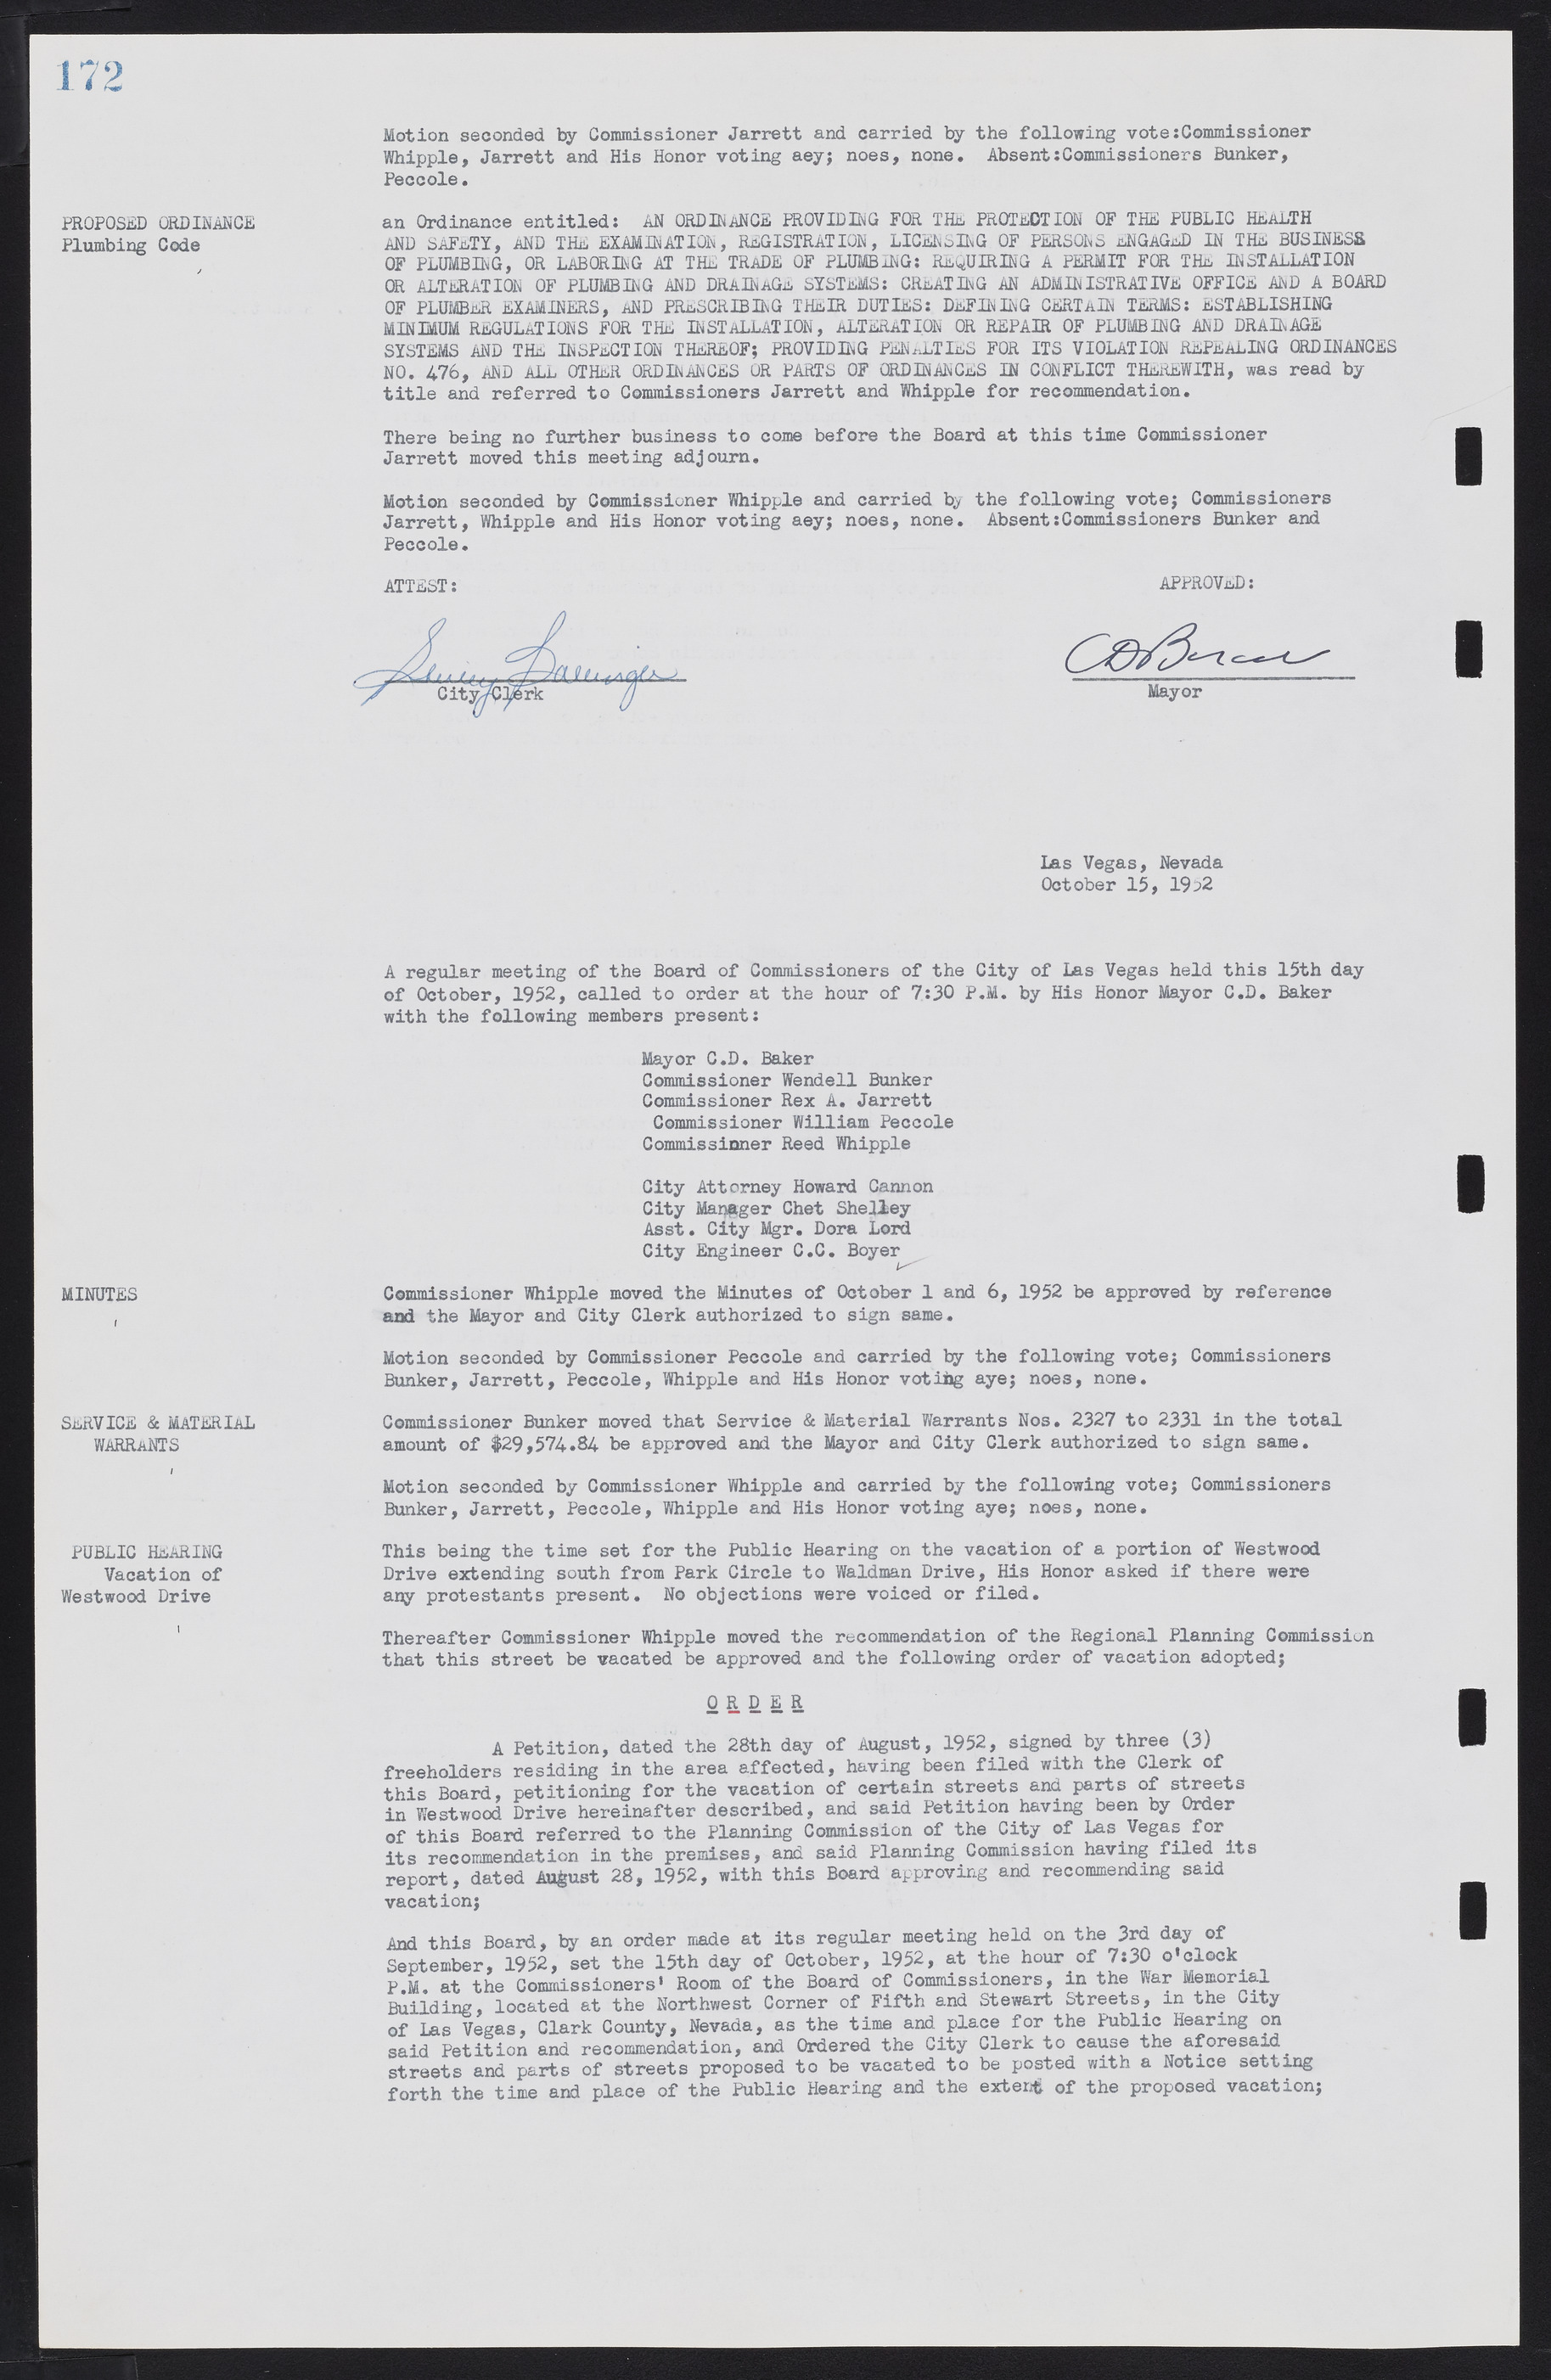 Las Vegas City Commission Minutes, May 26, 1952 to February 17, 1954, lvc000008-186